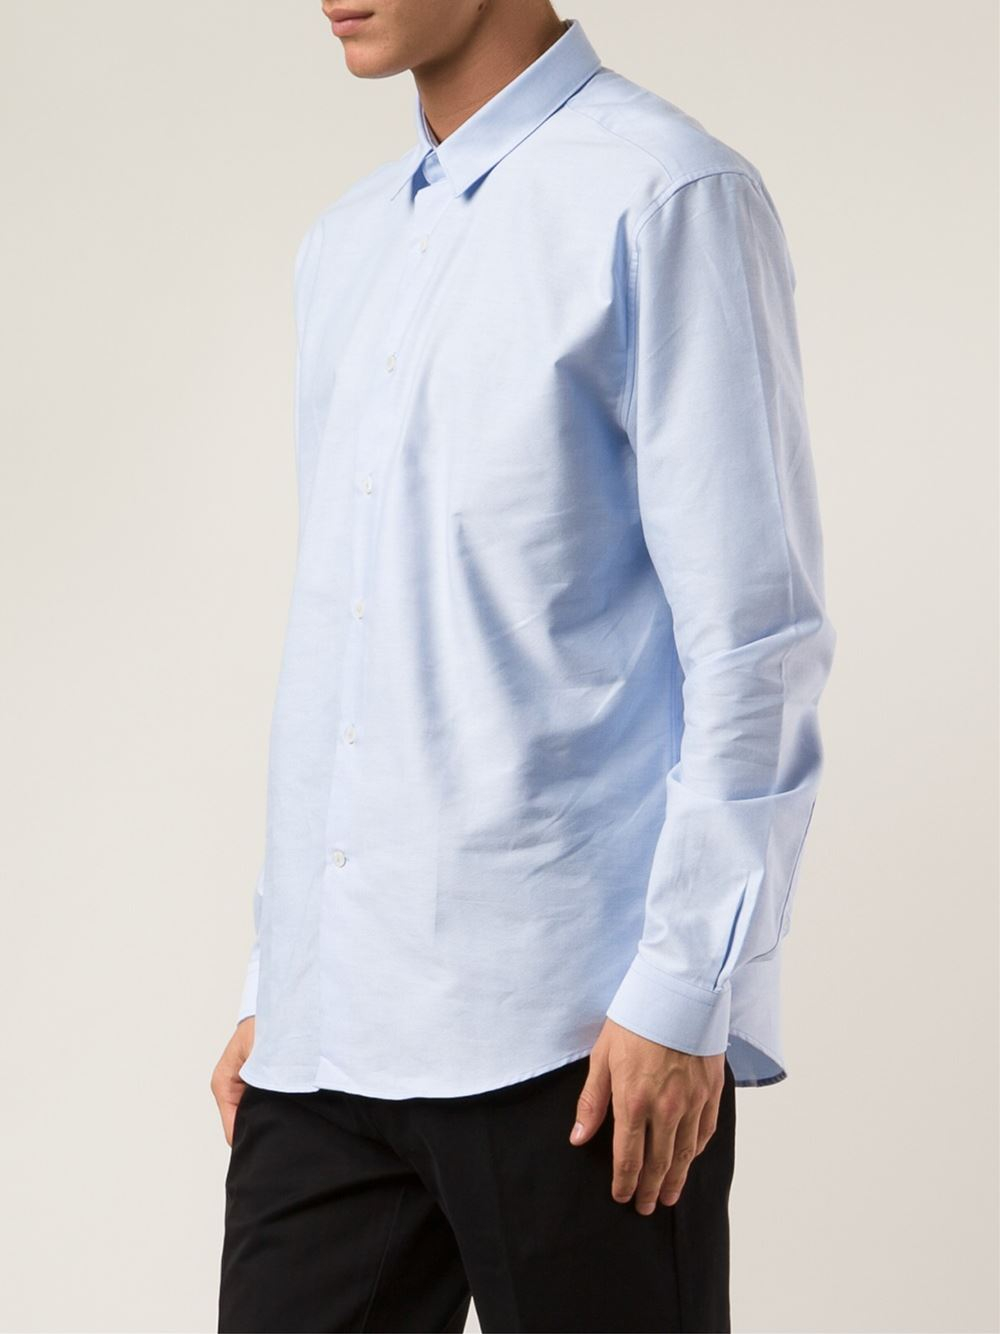 AMI Classic Shirt in Blue for Men - Lyst